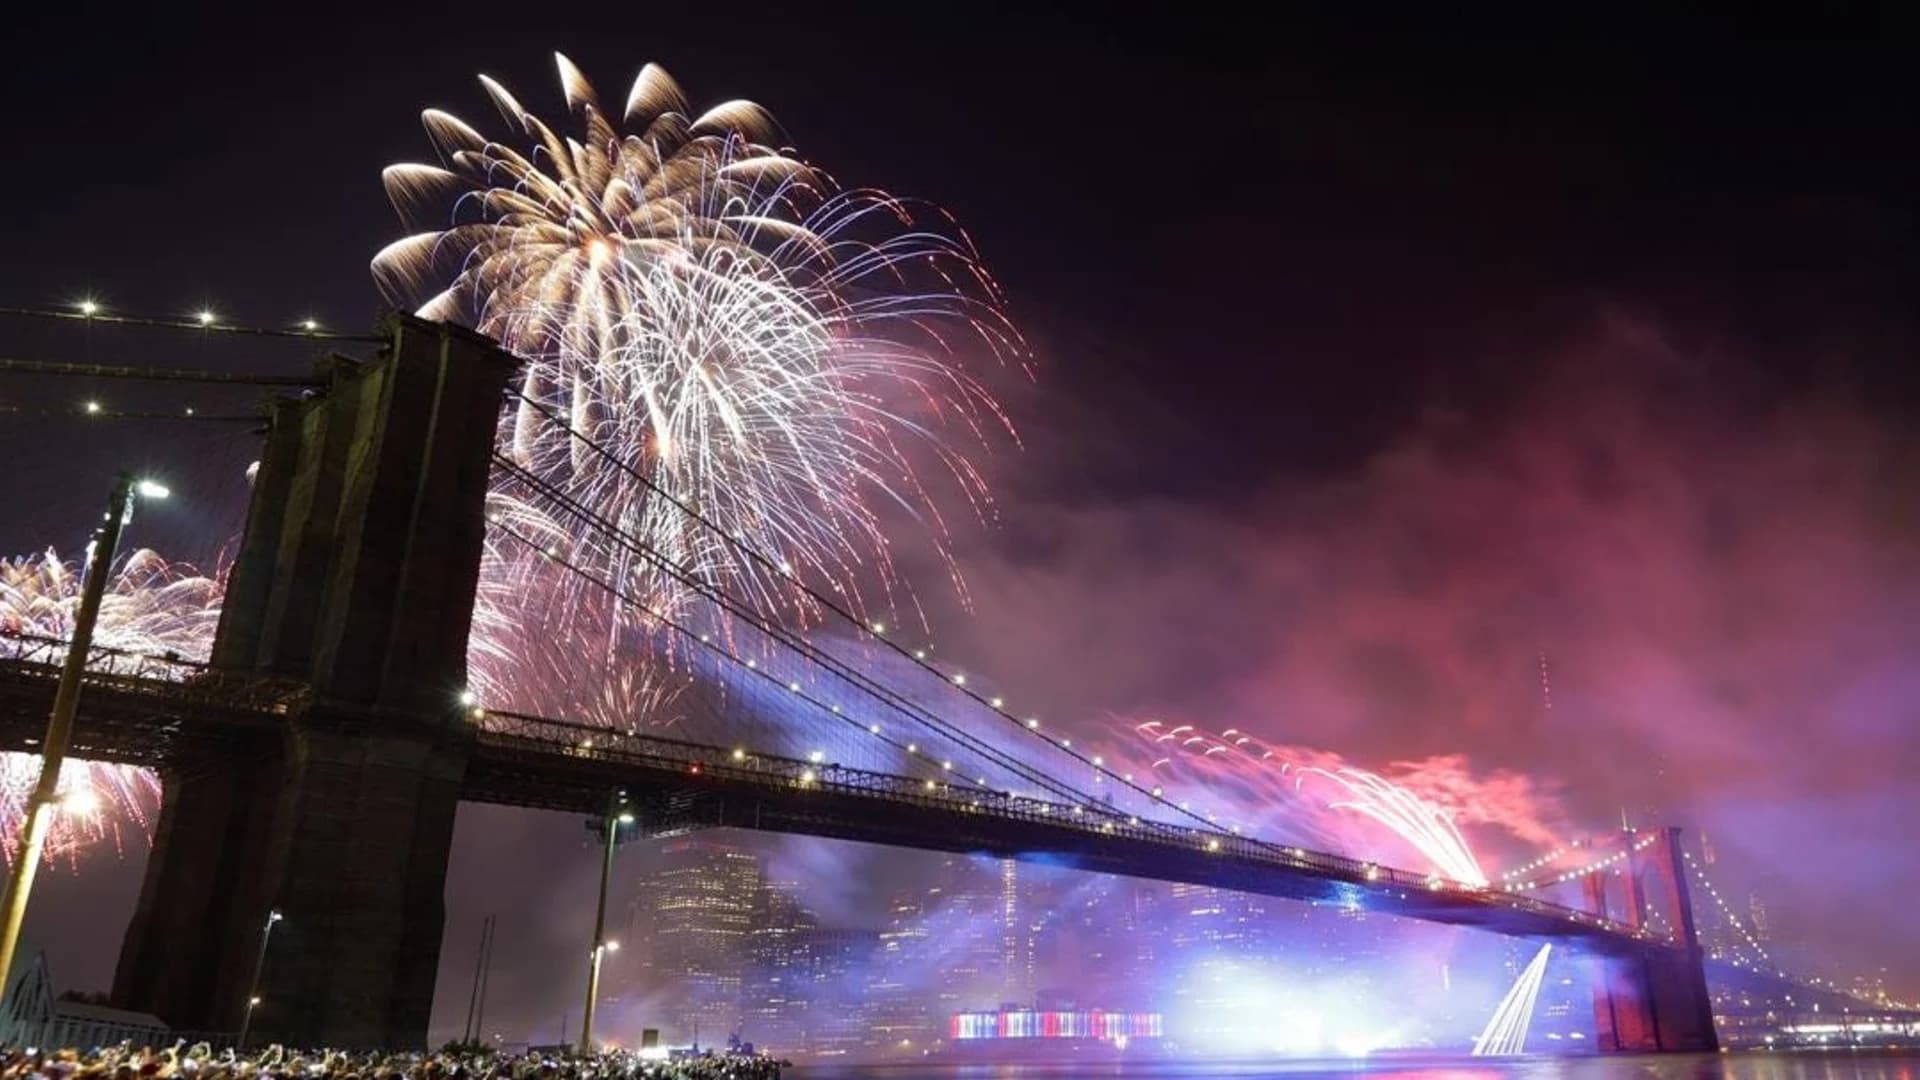 Macy’s 4th of July Fireworks Spectacular will go on, but where and when is a surprise